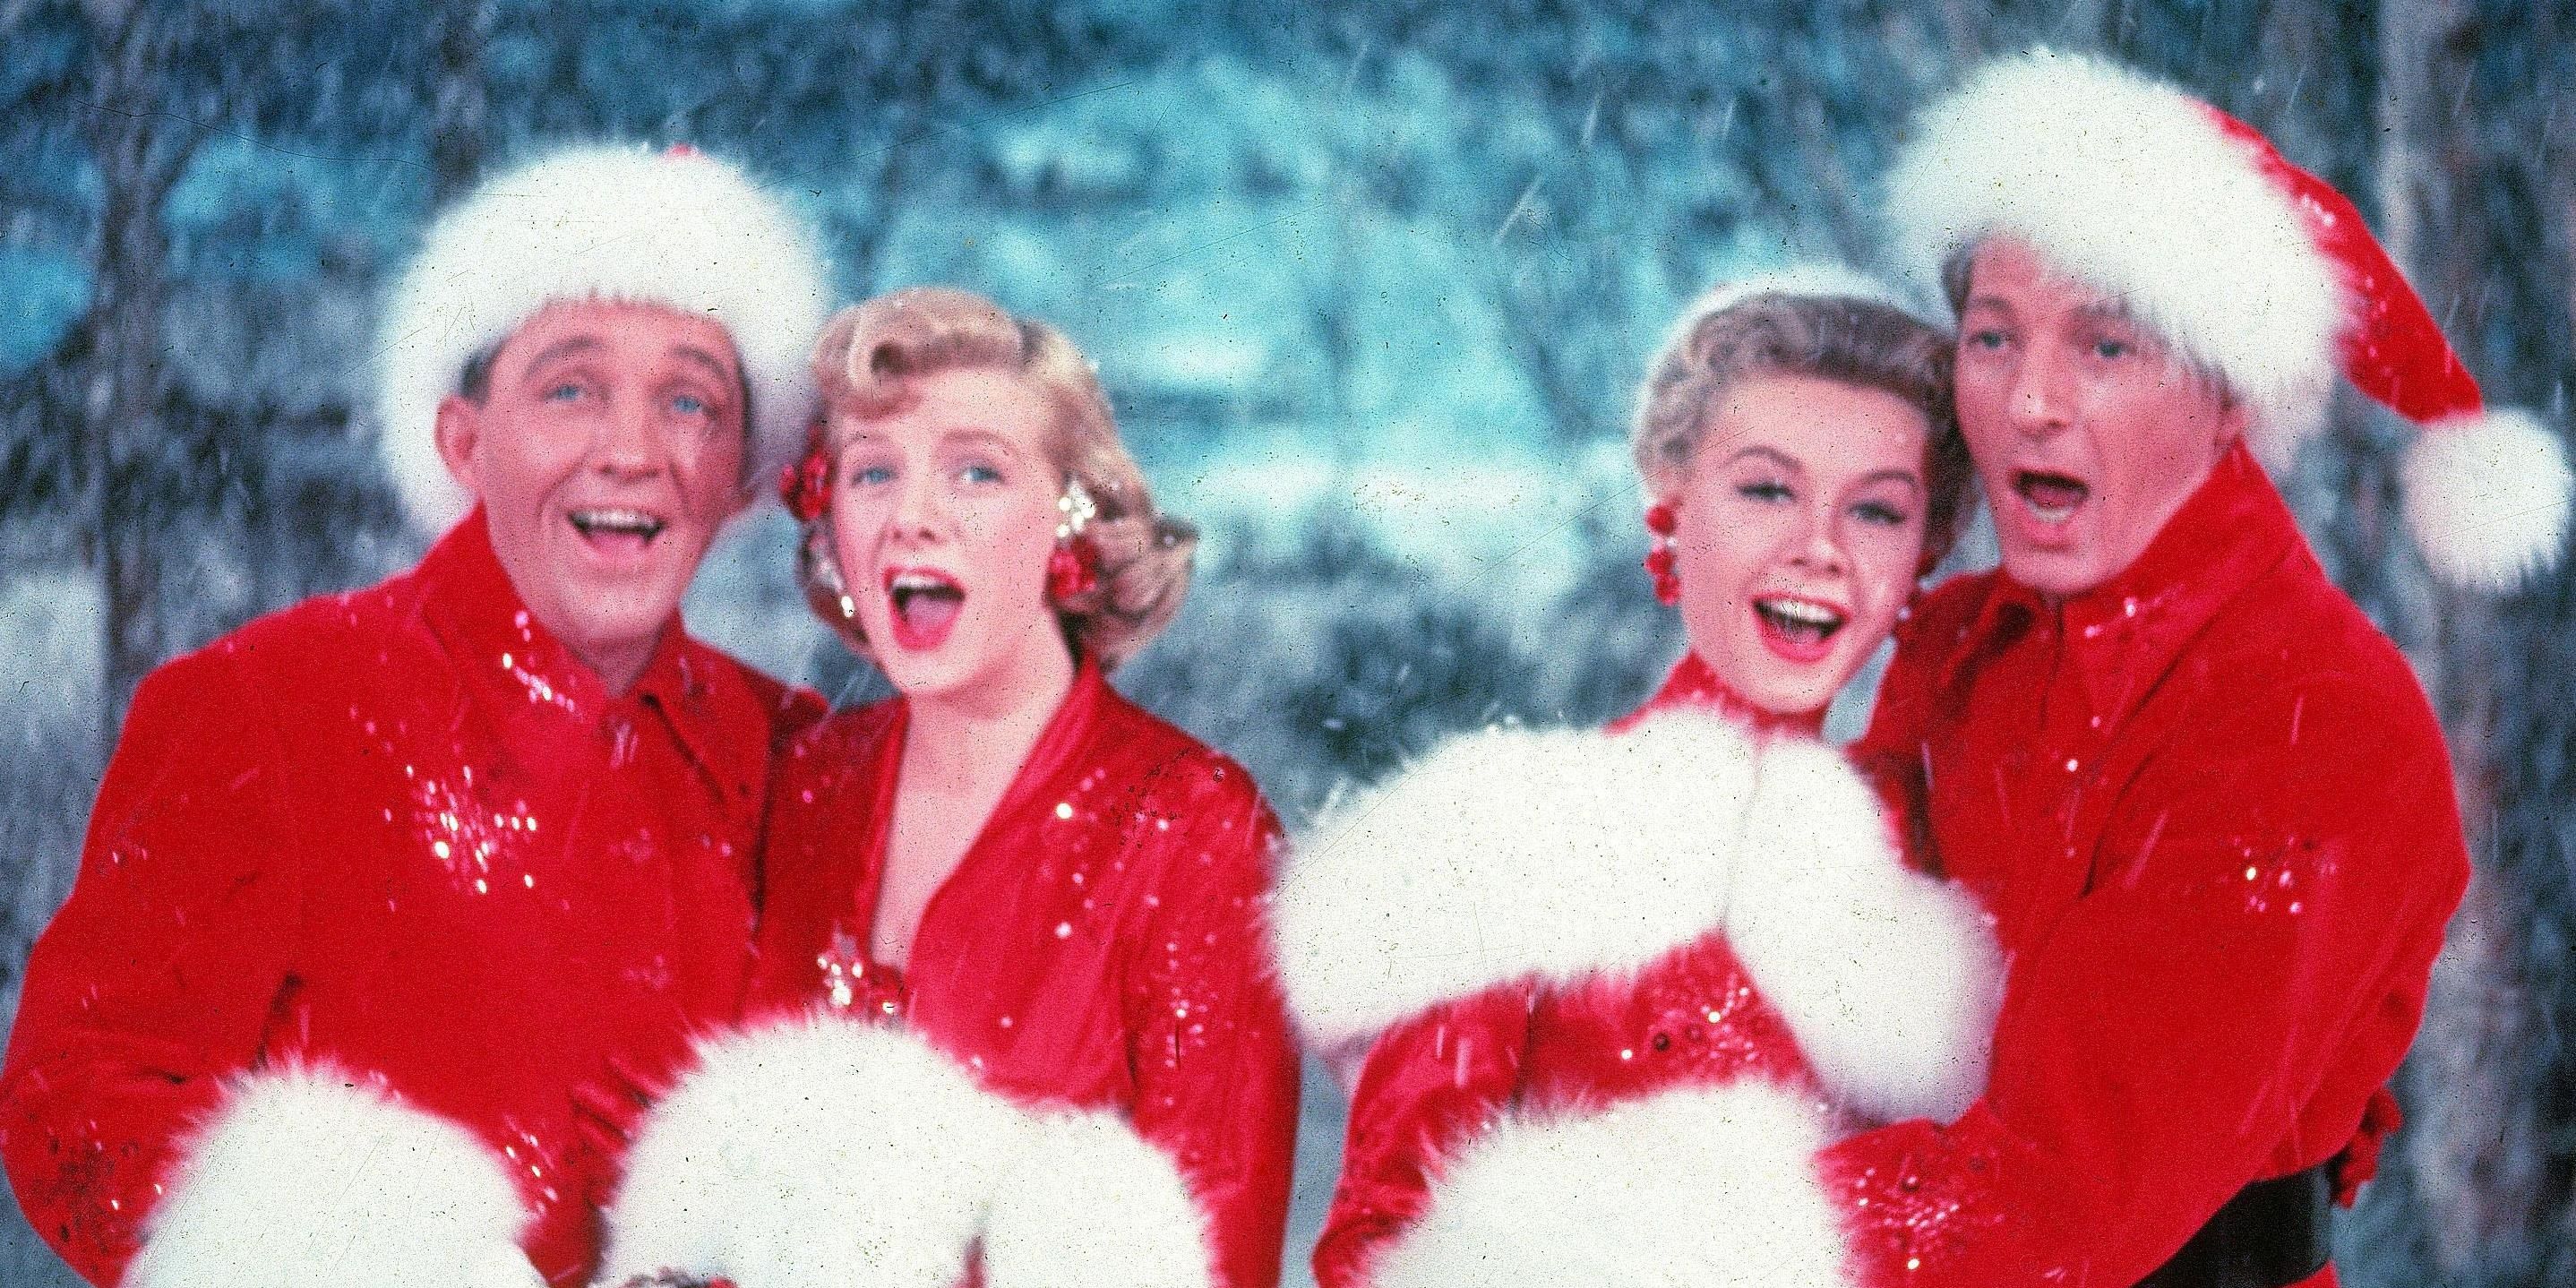 10 Best Christmas Movies To Watch If You Love Old Hollywood Films